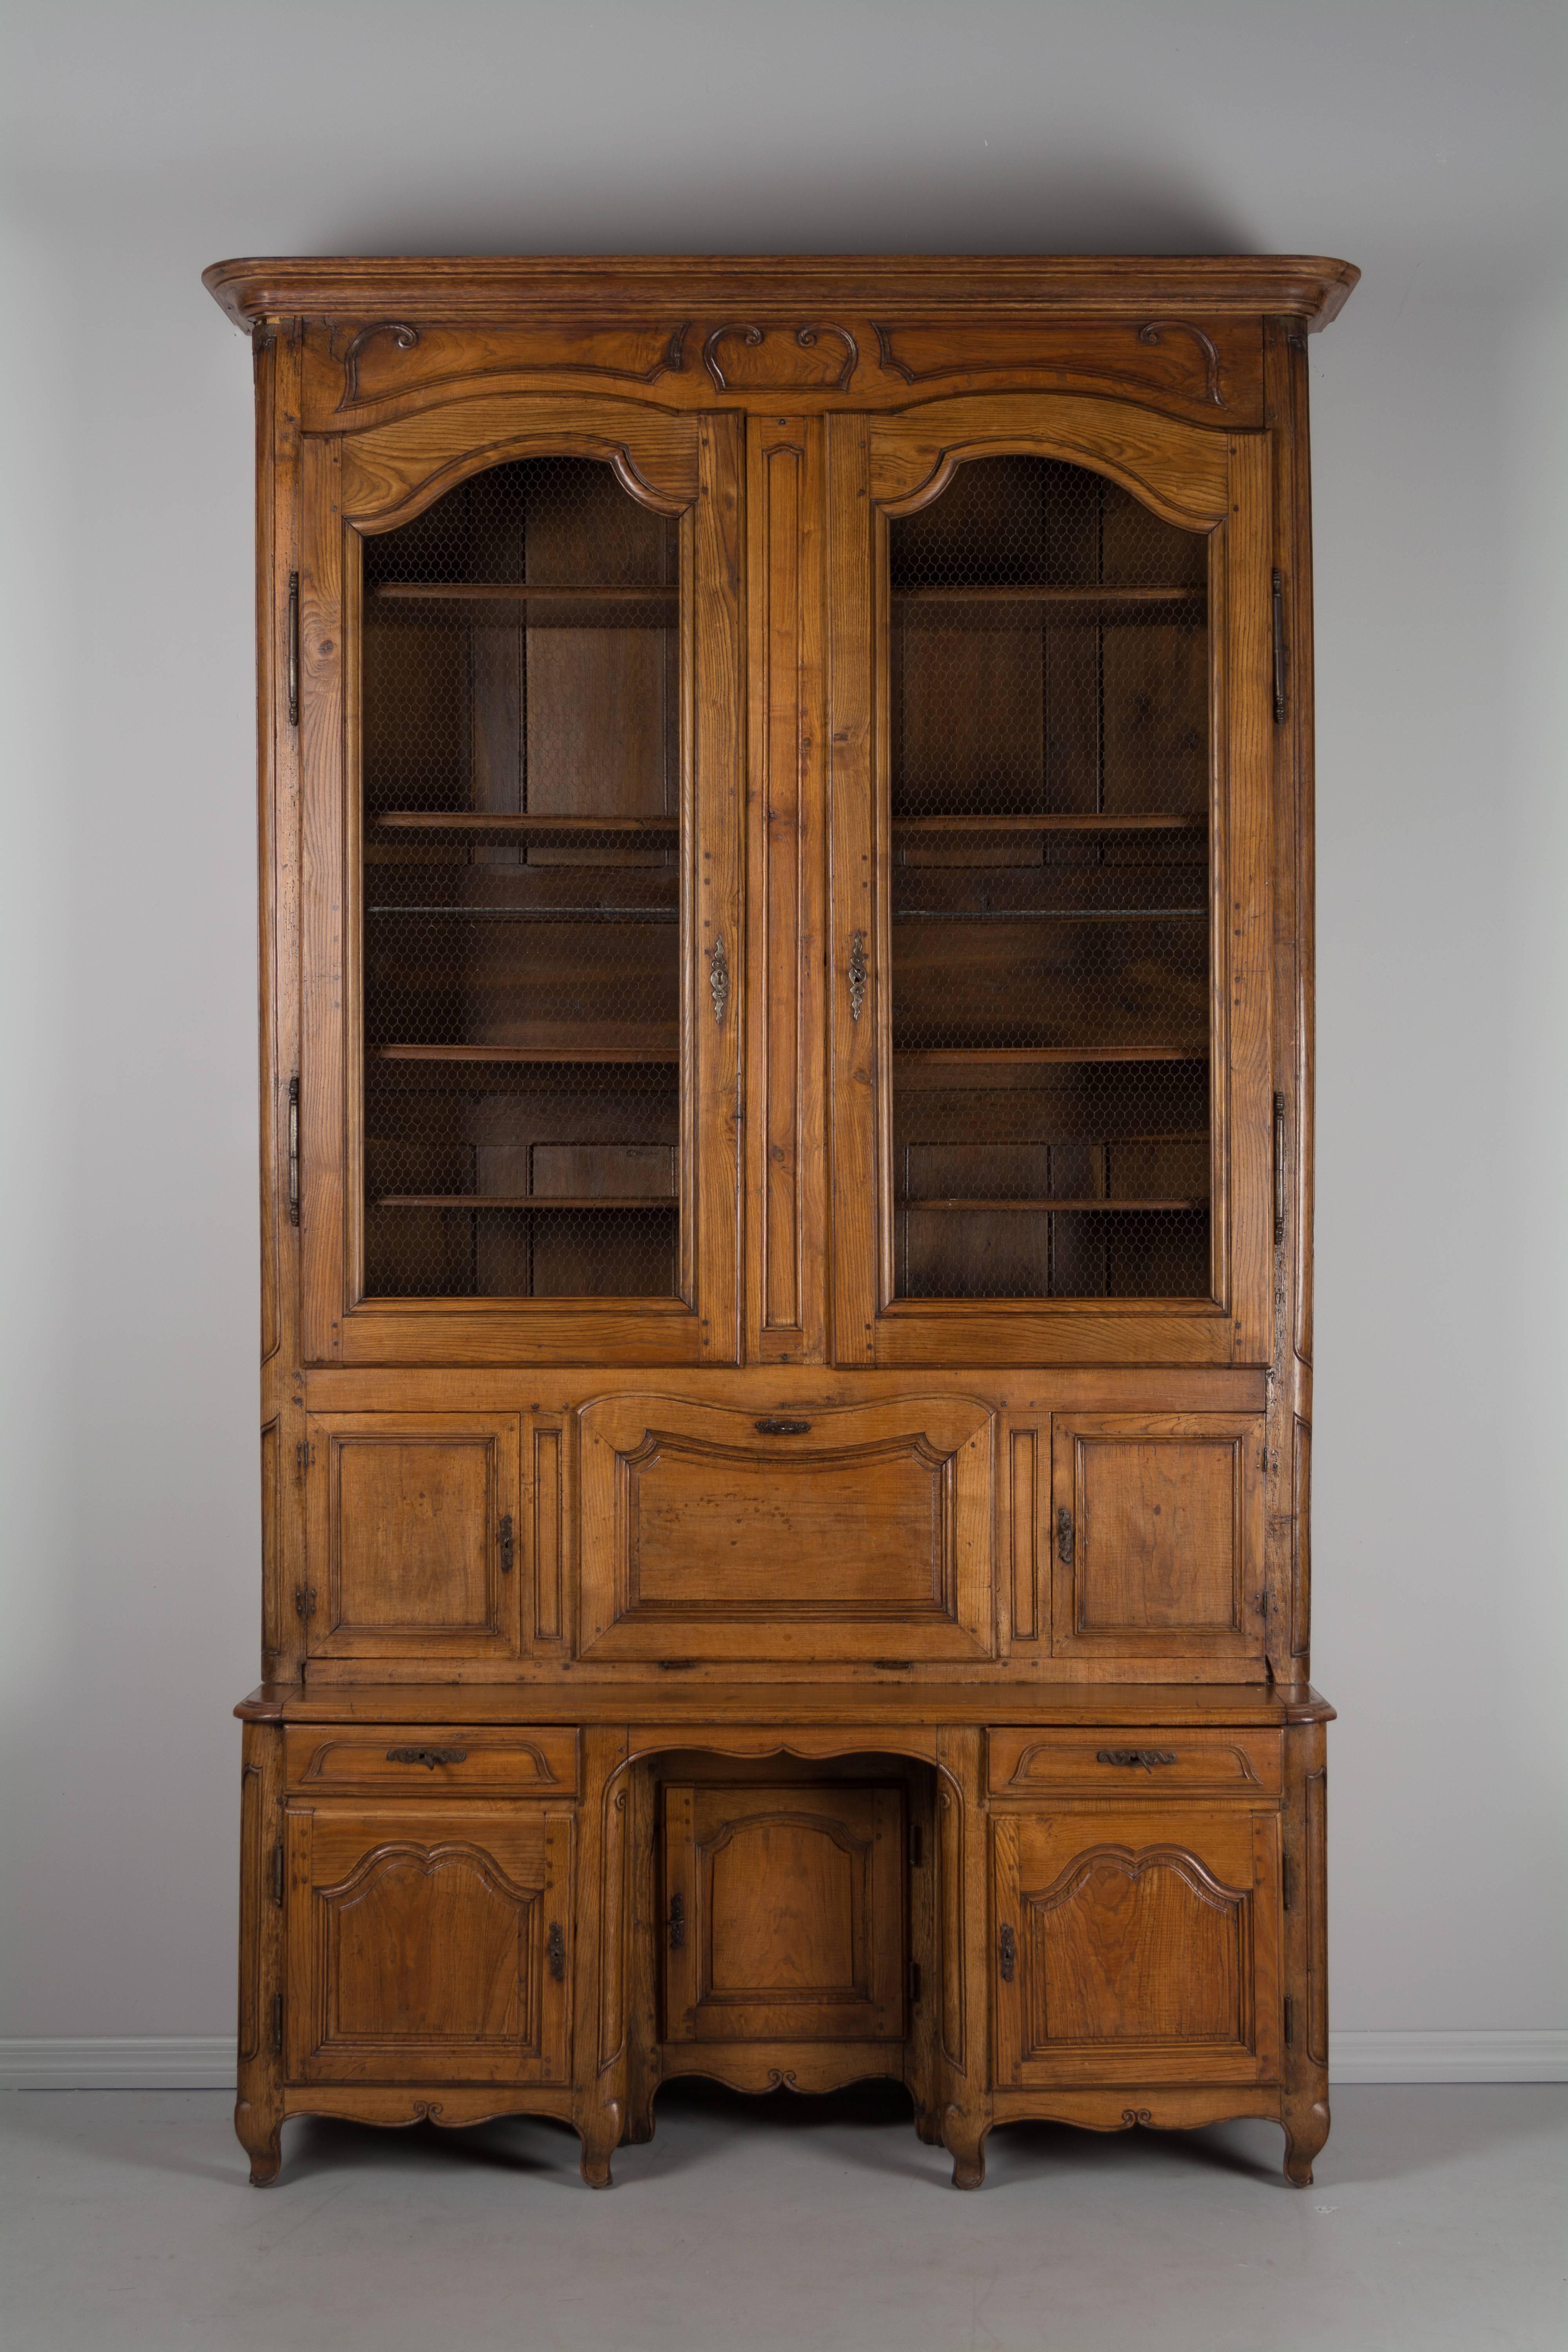 A grand scale 18th century French bibliothèque with scriban, or drop-leaf desk made of solid elmwood. The large bookcase has chicken wire doors opening to four adjustable shelves, above a drop leaf desk flanked by two locking cabinets. The interior